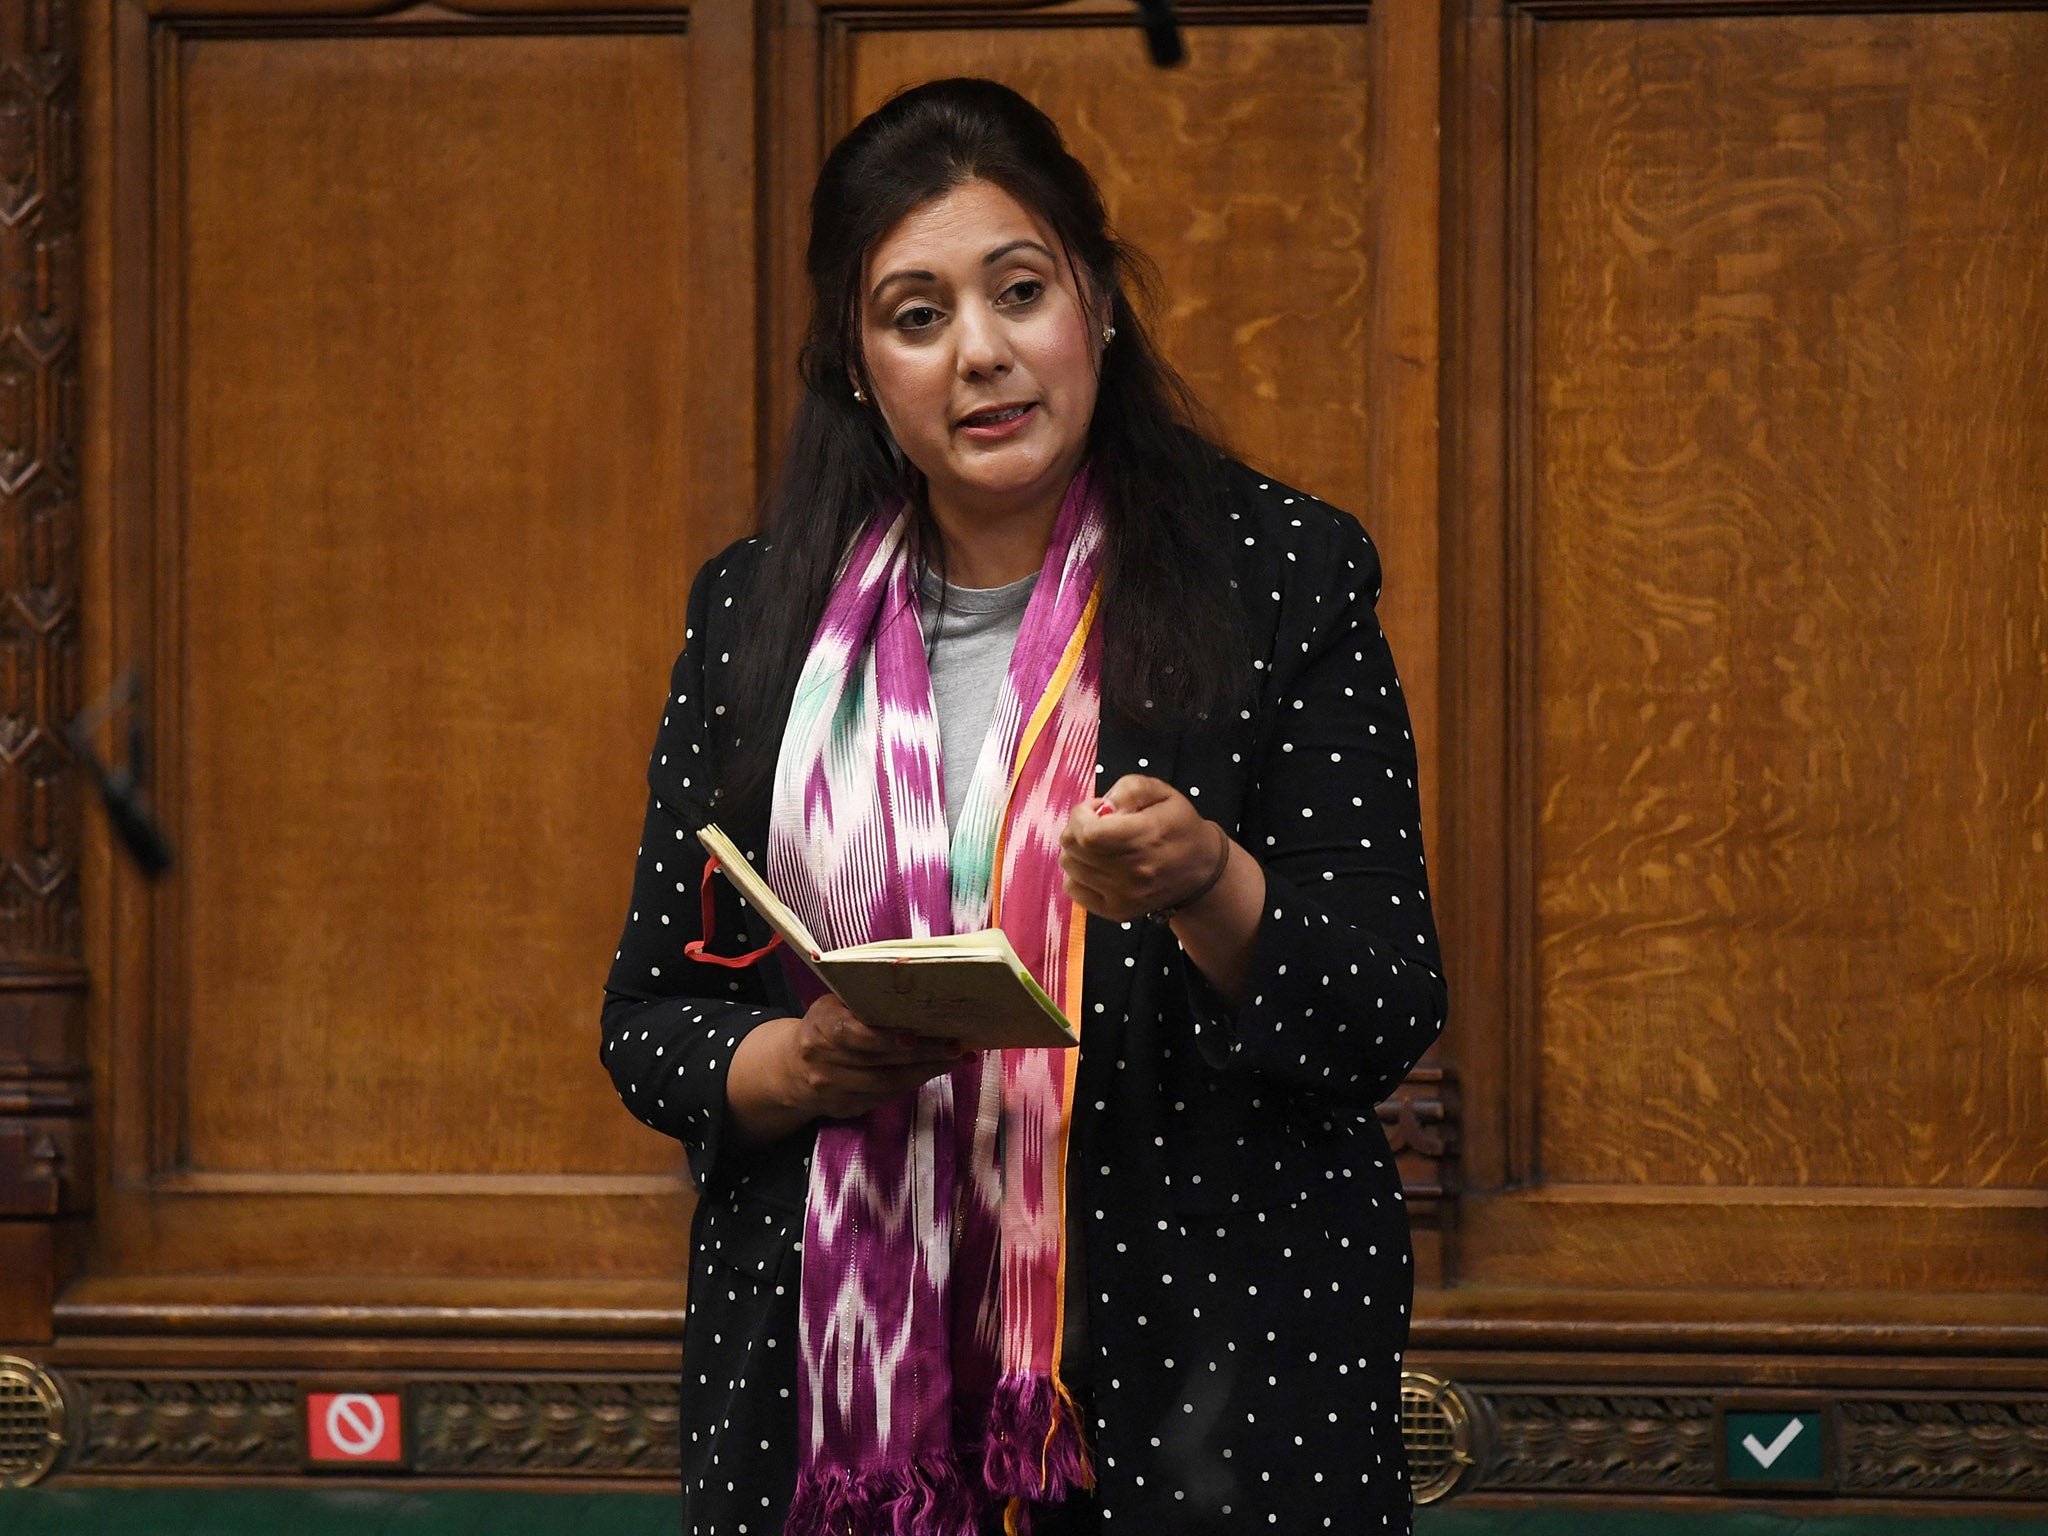 The prime minister has ordered an inquiry into Nusrat Ghani’s ‘Muslimness’ sacking claims